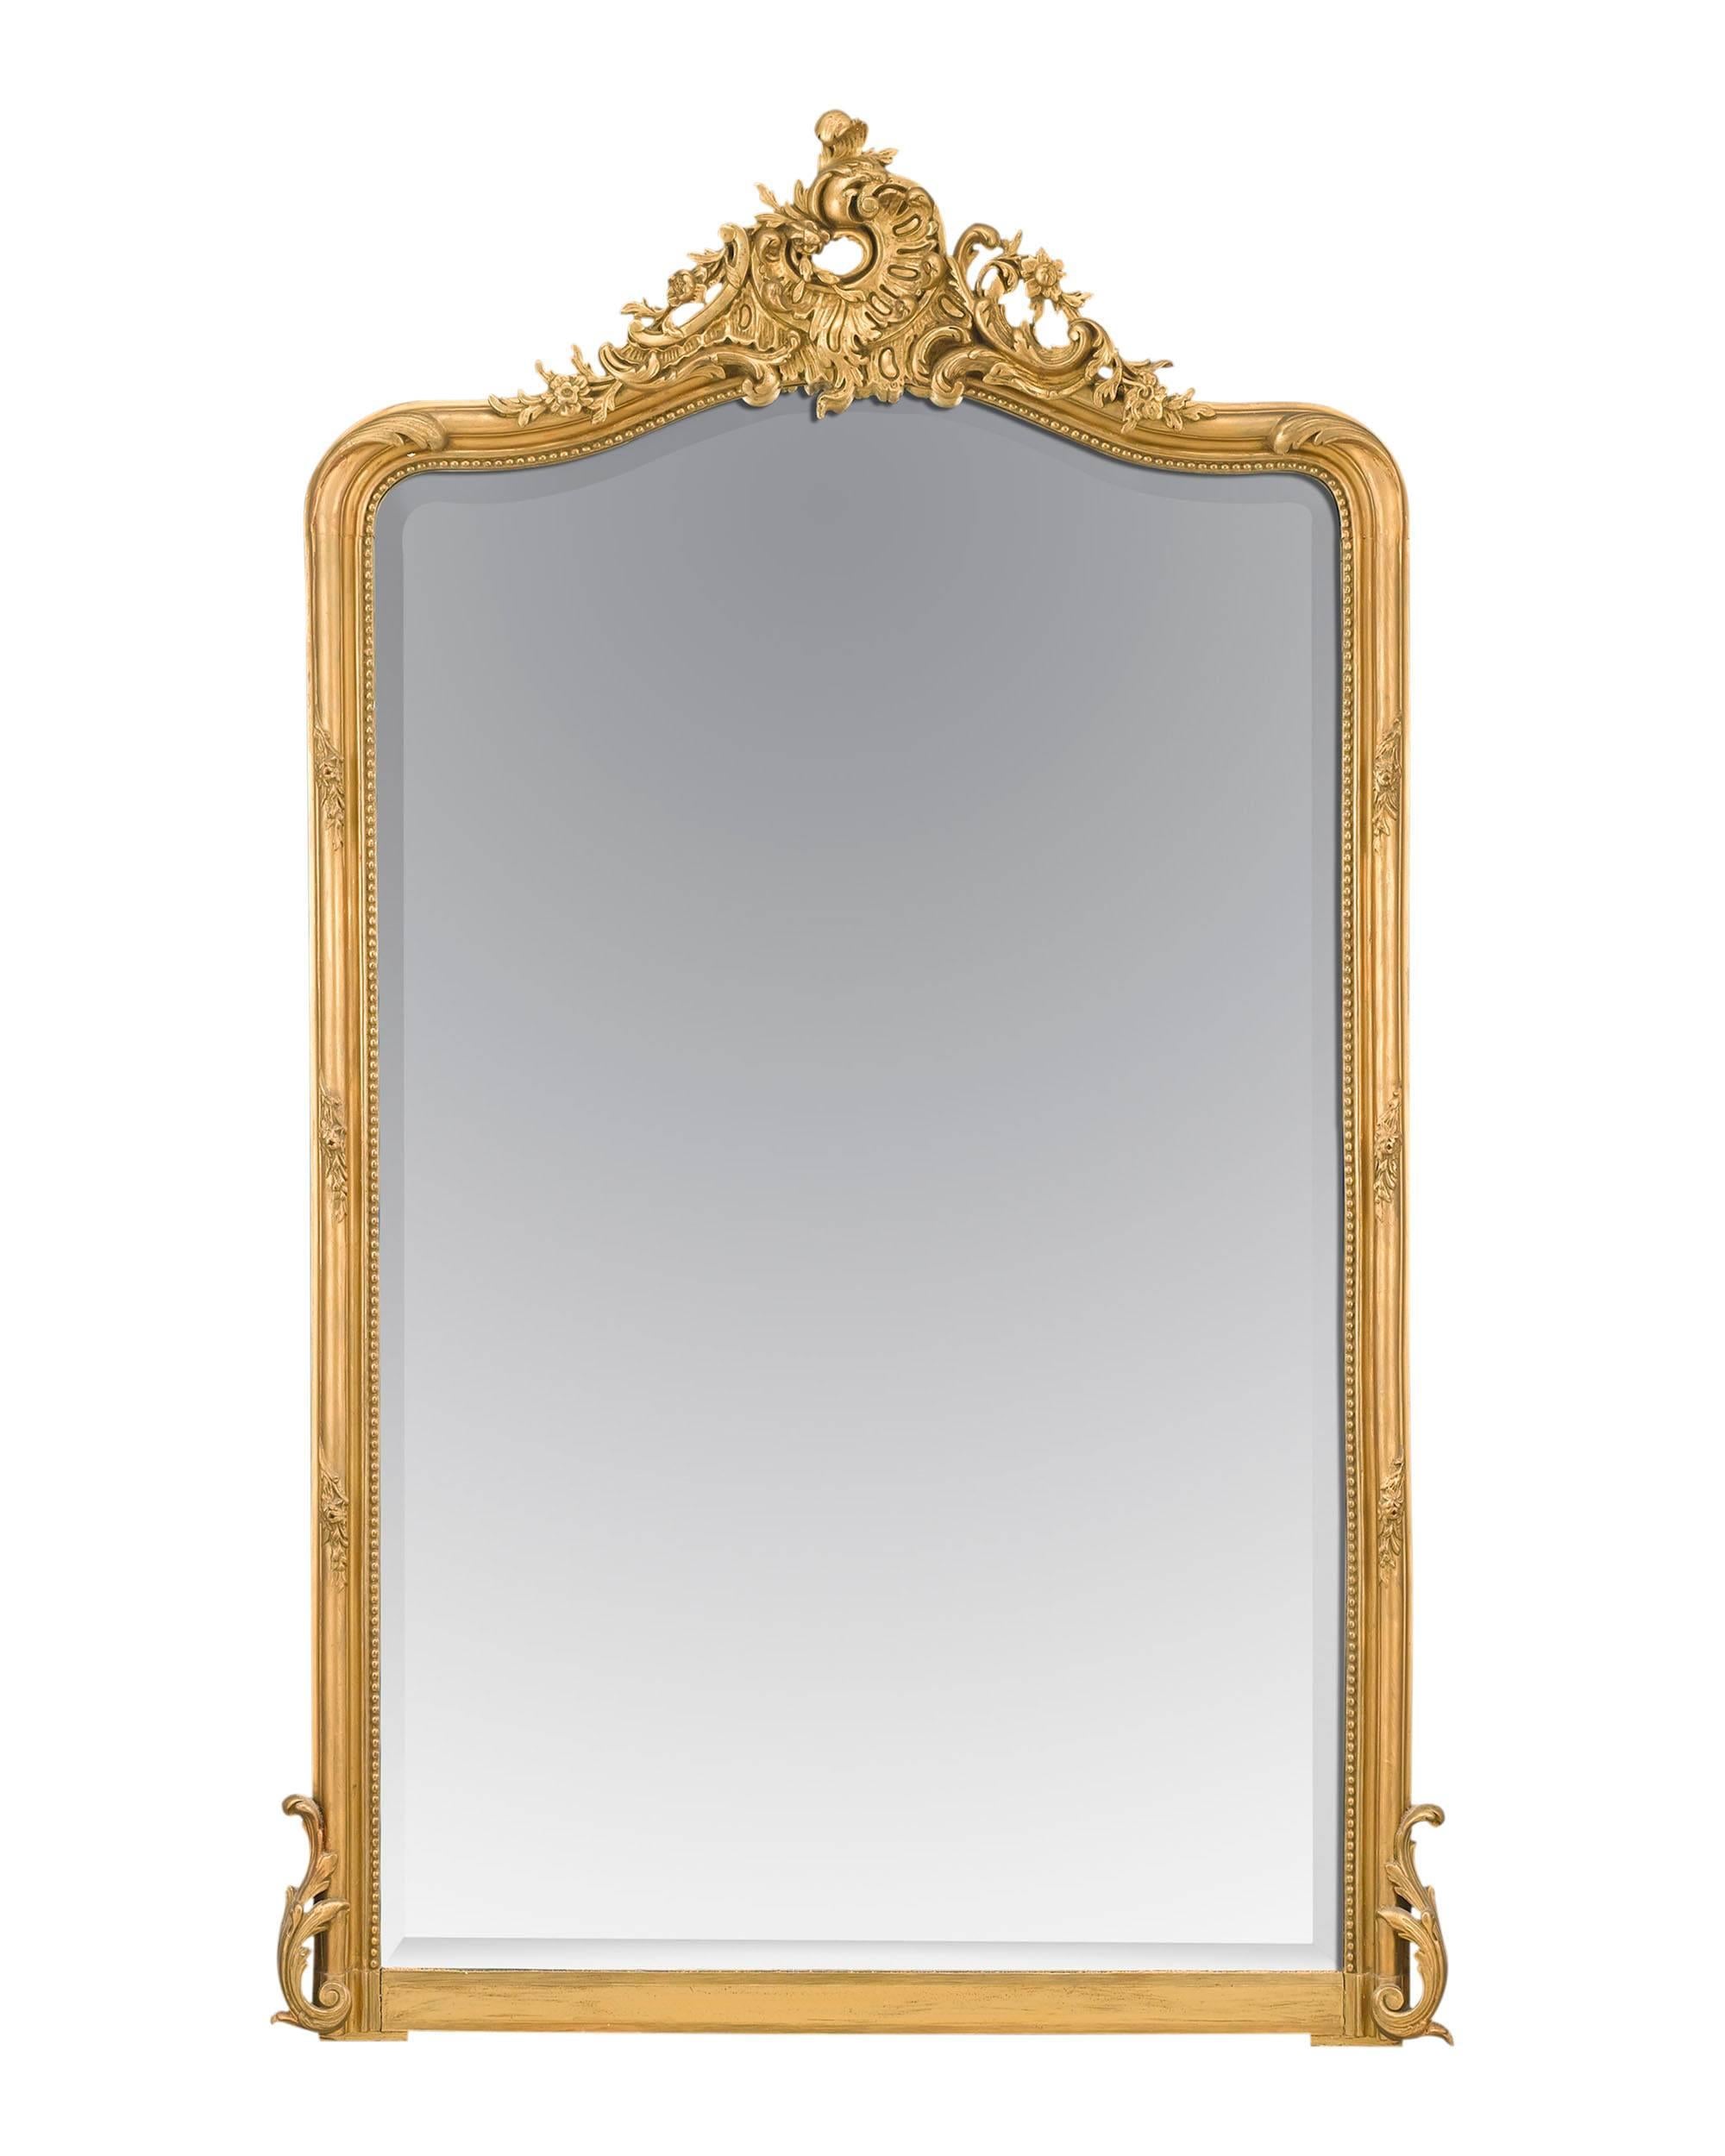 This stunning and very impressive gilt French mirror is of exceptional quality. Styled in the Louis XV fashion, the mirror features a heavy scroll relief and detailed beading that frames the beveled mirror. Displaying magnificent size, expertly